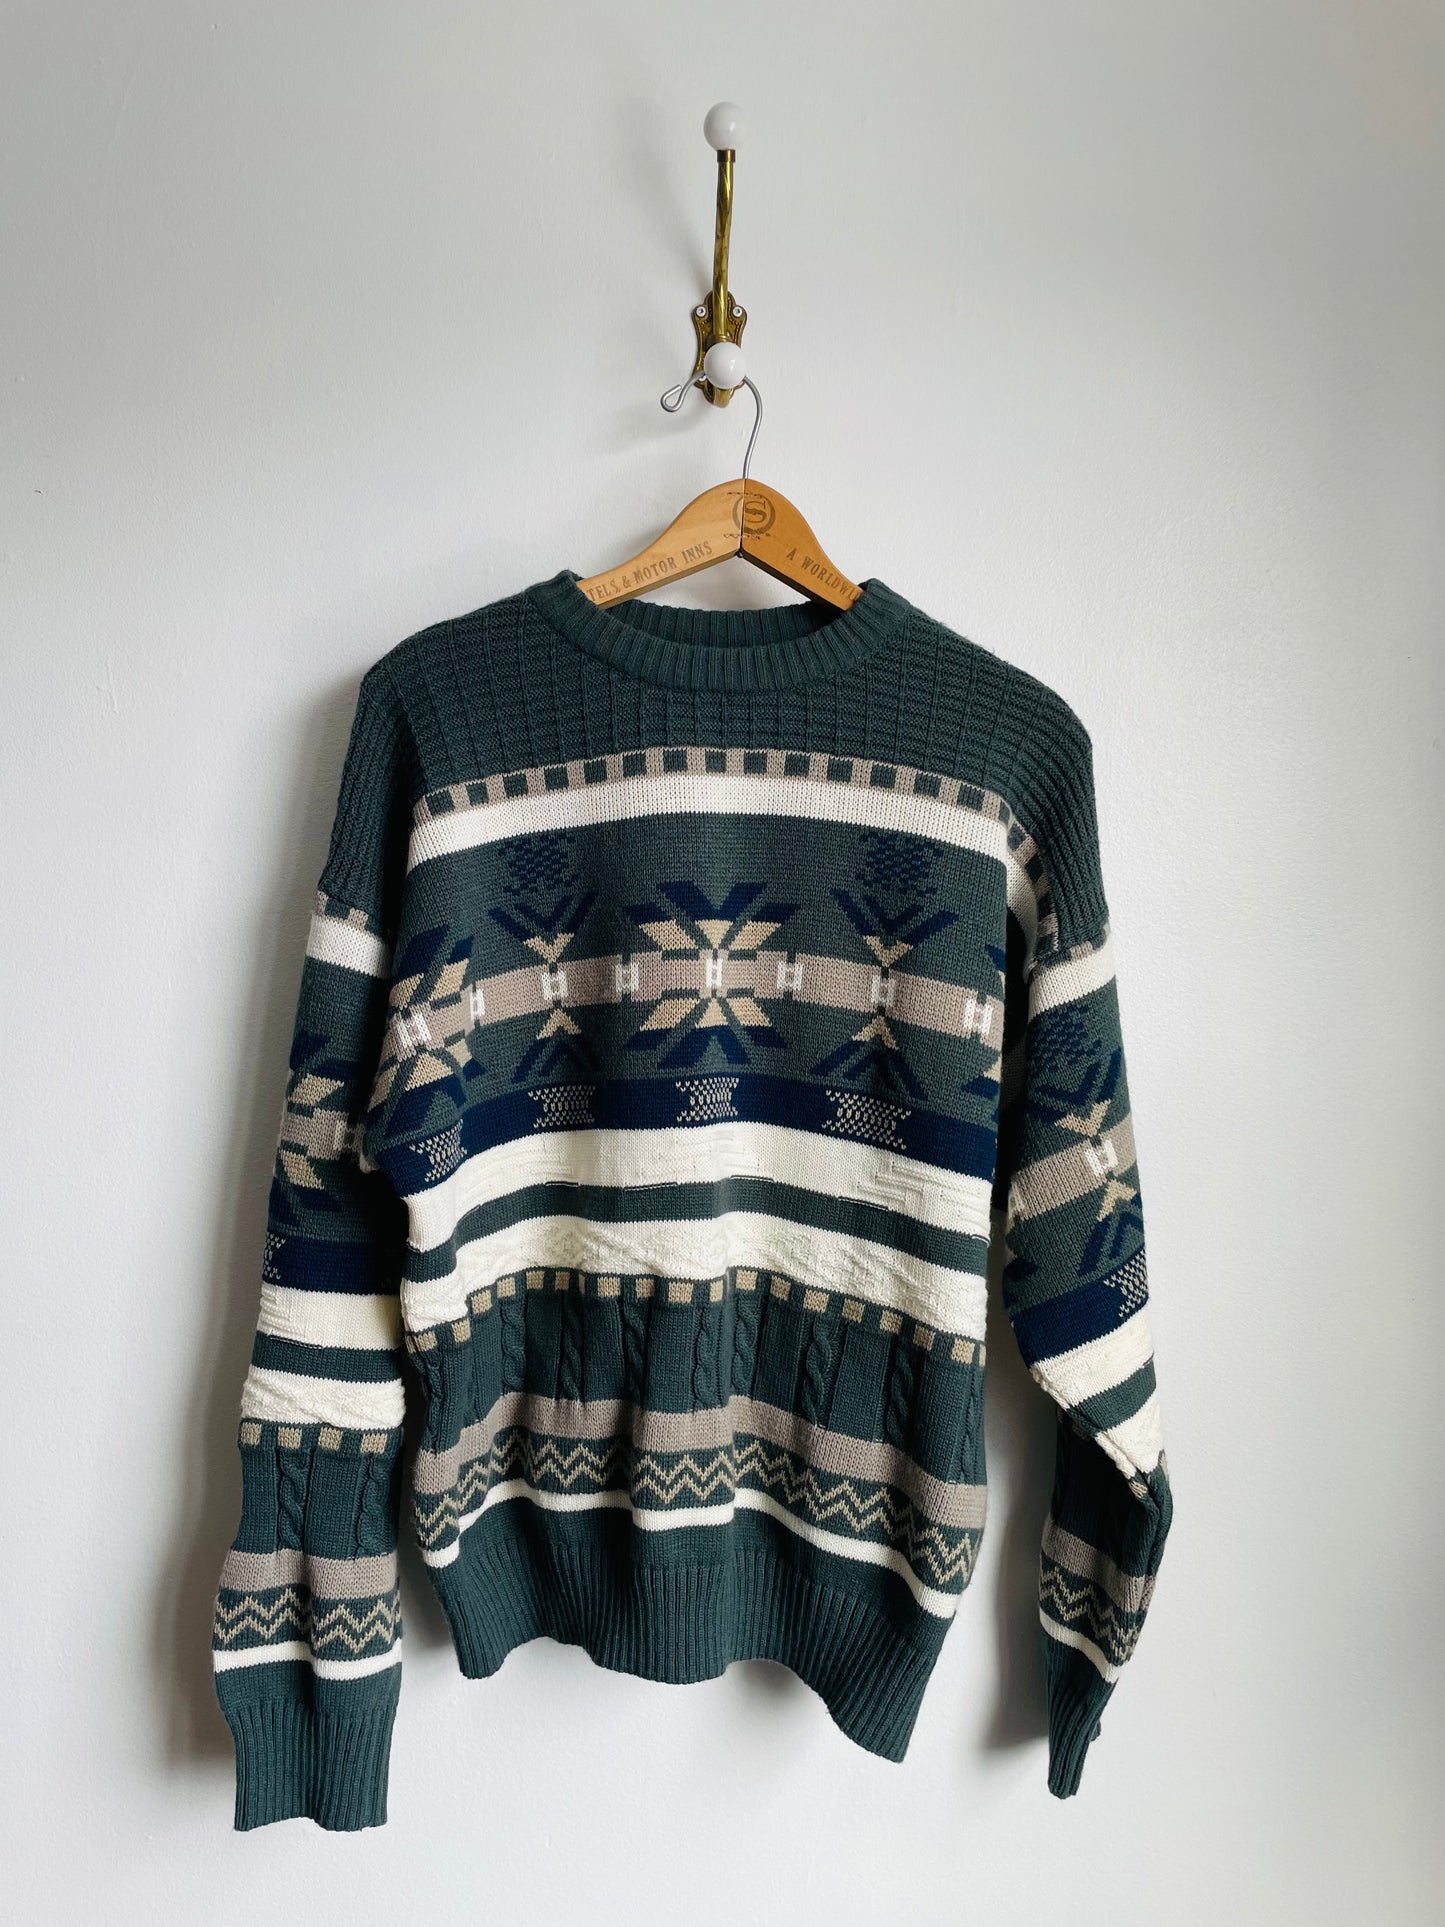 Northwest Territory Knit Sweater with Snowflake Design - Size Medium - Made in Bulgaria